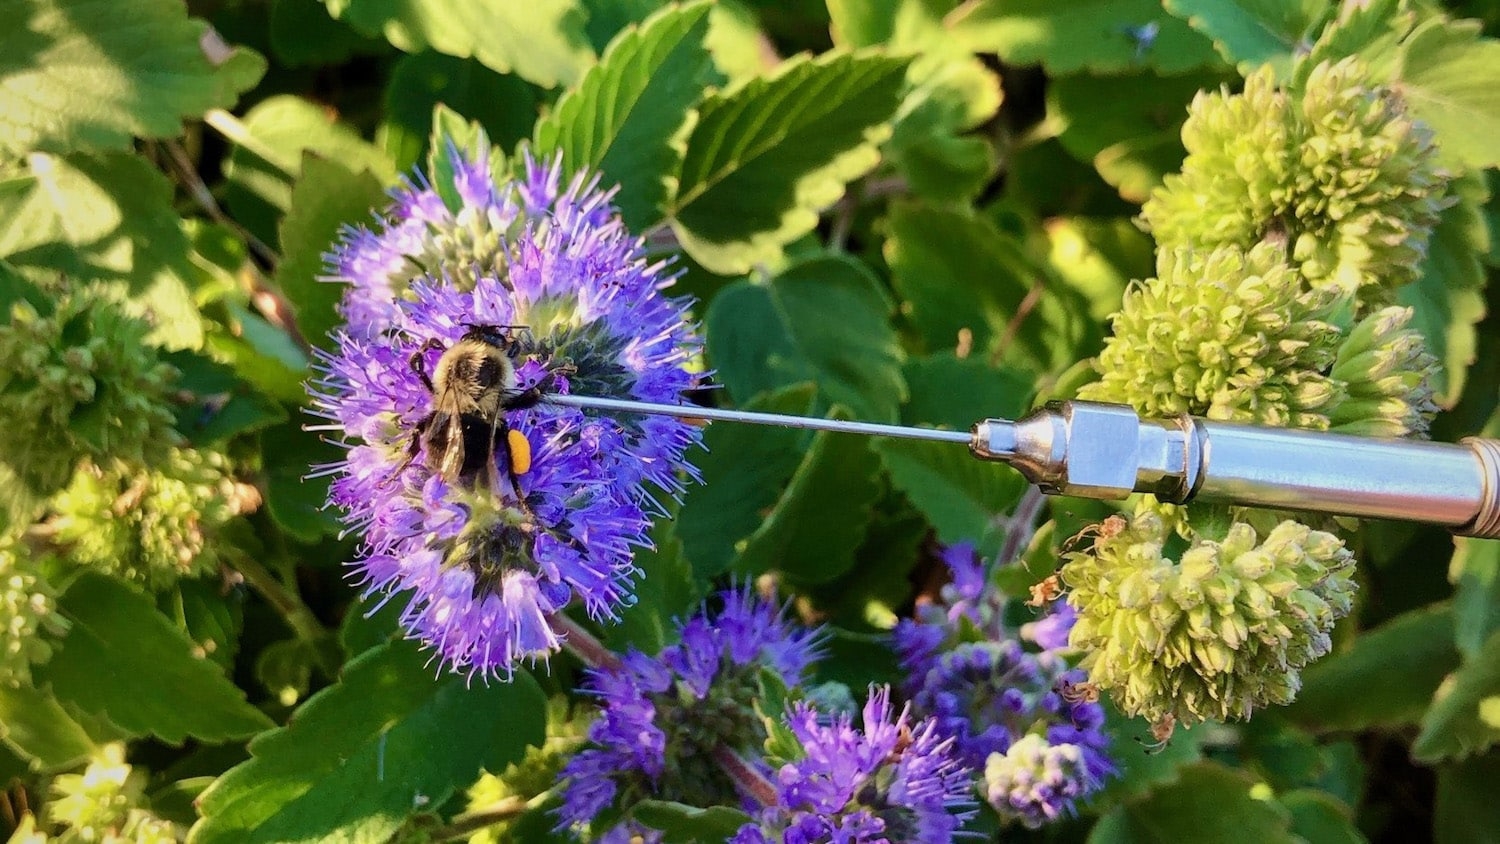 a metal thermometer gently touches the back of a bee on a flower